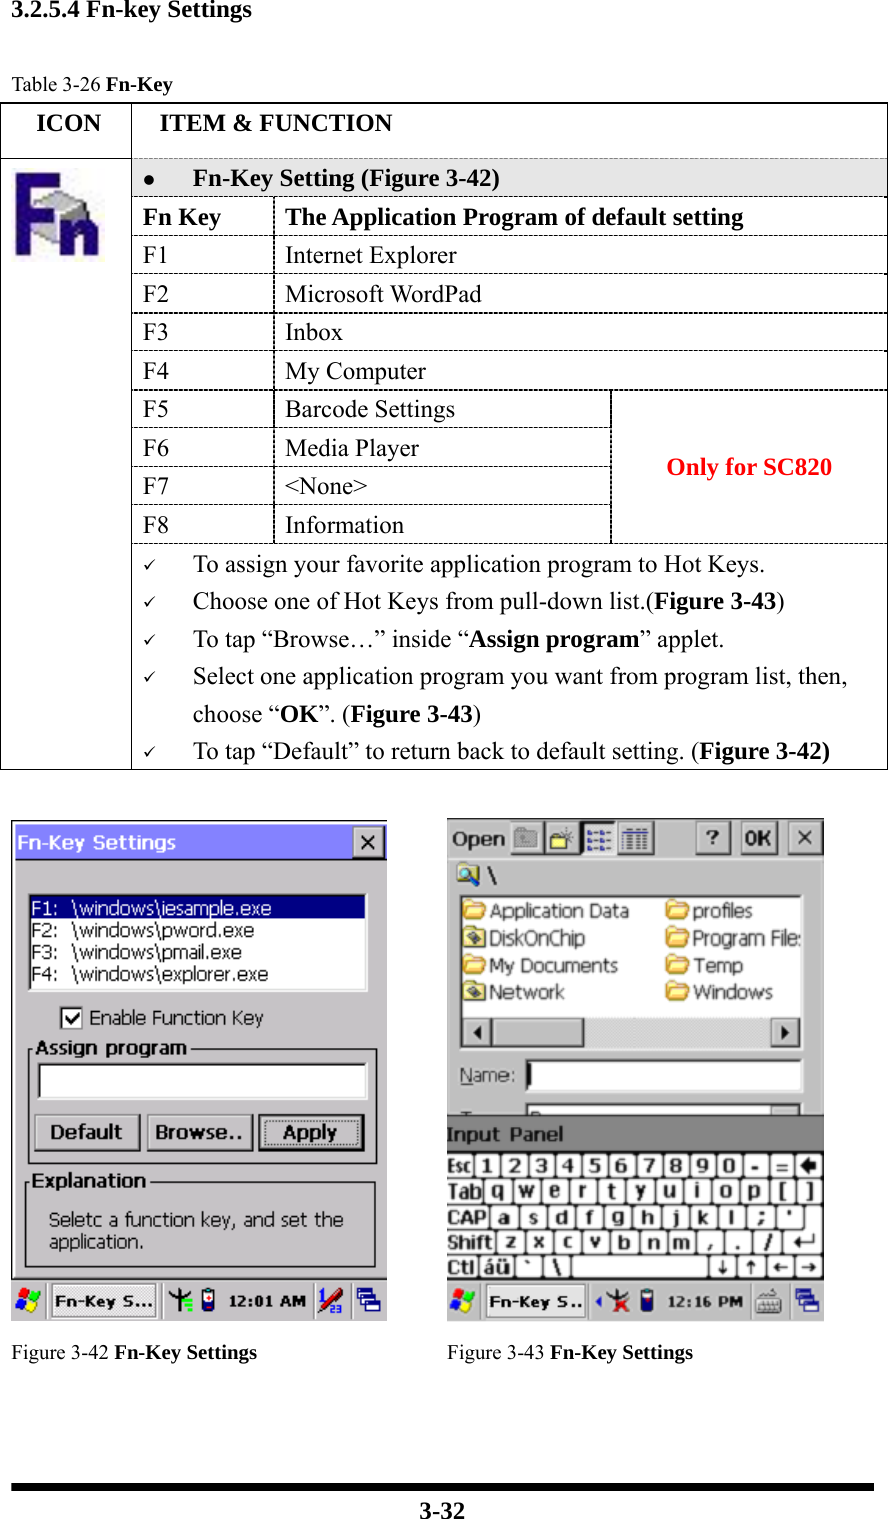  3-32 3.2.5.4 Fn-key Settings  Table 3-26 Fn-Key   ICON   ITEM &amp; FUNCTION z Fn-Key Setting (Figure 3-42) Fn Key  The Application Program of default setting F1 Internet Explorer F2 Microsoft WordPad F3 Inbox F4 My Computer F5 Barcode Settings F6 Media Player F7 &lt;None&gt; F8 Information Only for SC820  9 To assign your favorite application program to Hot Keys. 9 Choose one of Hot Keys from pull-down list.(Figure 3-43) 9 To tap “Browse…” inside “Assign program” applet. 9 Select one application program you want from program list, then, choose “OK”. (Figure 3-43) 9 To tap “Default” to return back to default setting. (Figure 3-42)    Figure 3-42 Fn-Key Settings Figure 3-43 Fn-Key Settings   